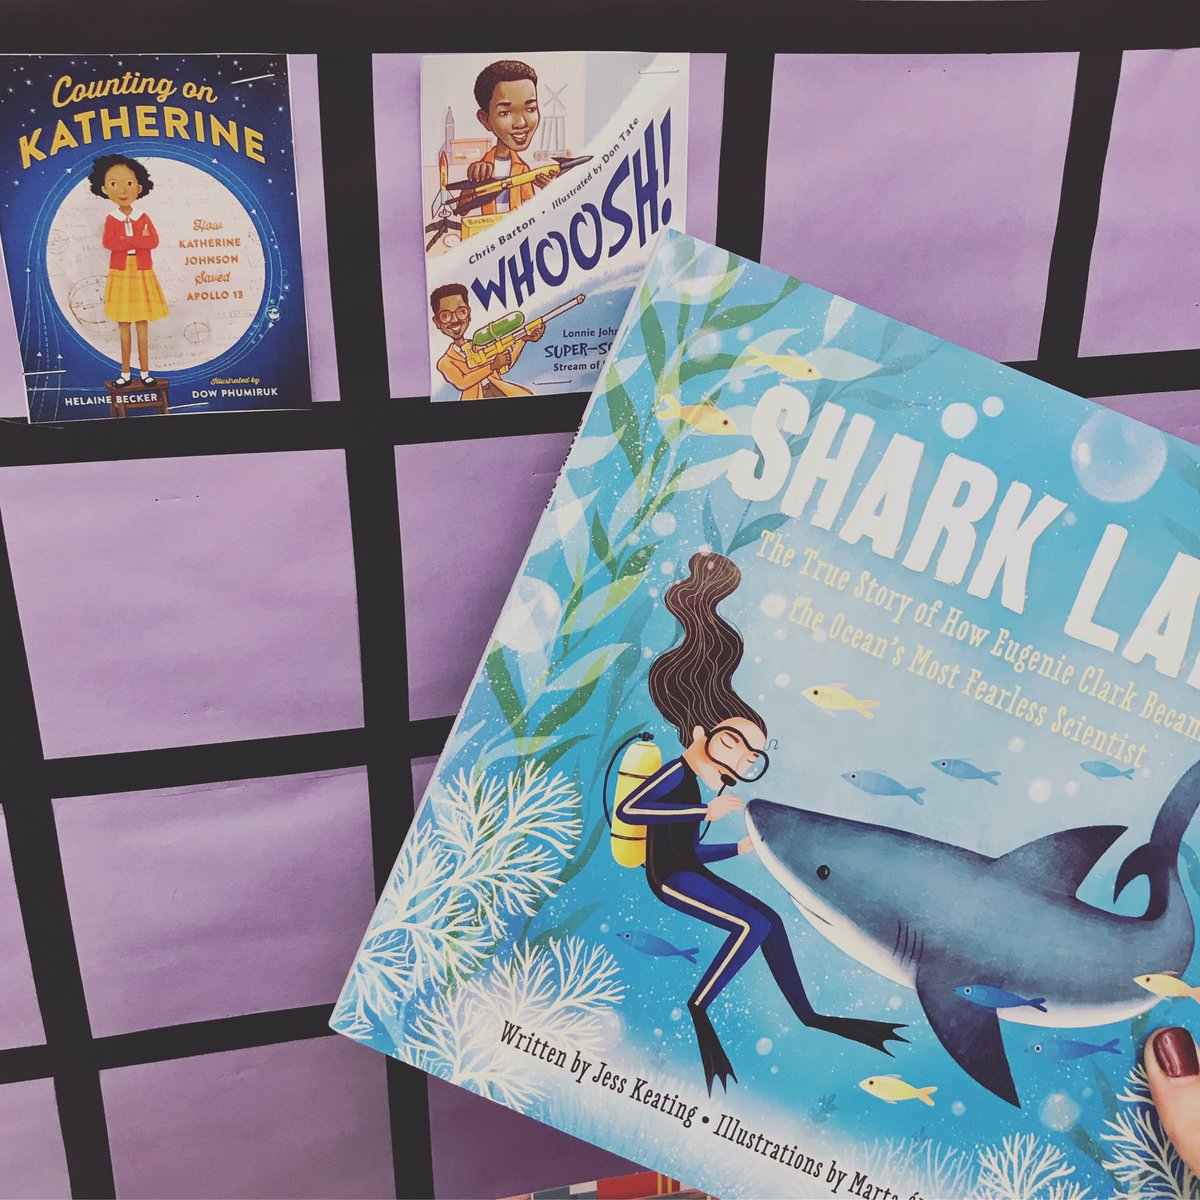 Inspired by our @CollabClassroom read this week- “Brave Harriet”....
Read a few AWESOME #narrativenonfiction biographies for #classroombookaday this week! Total engagement! Ss found a common thread in each text- the power of believing in yourself.